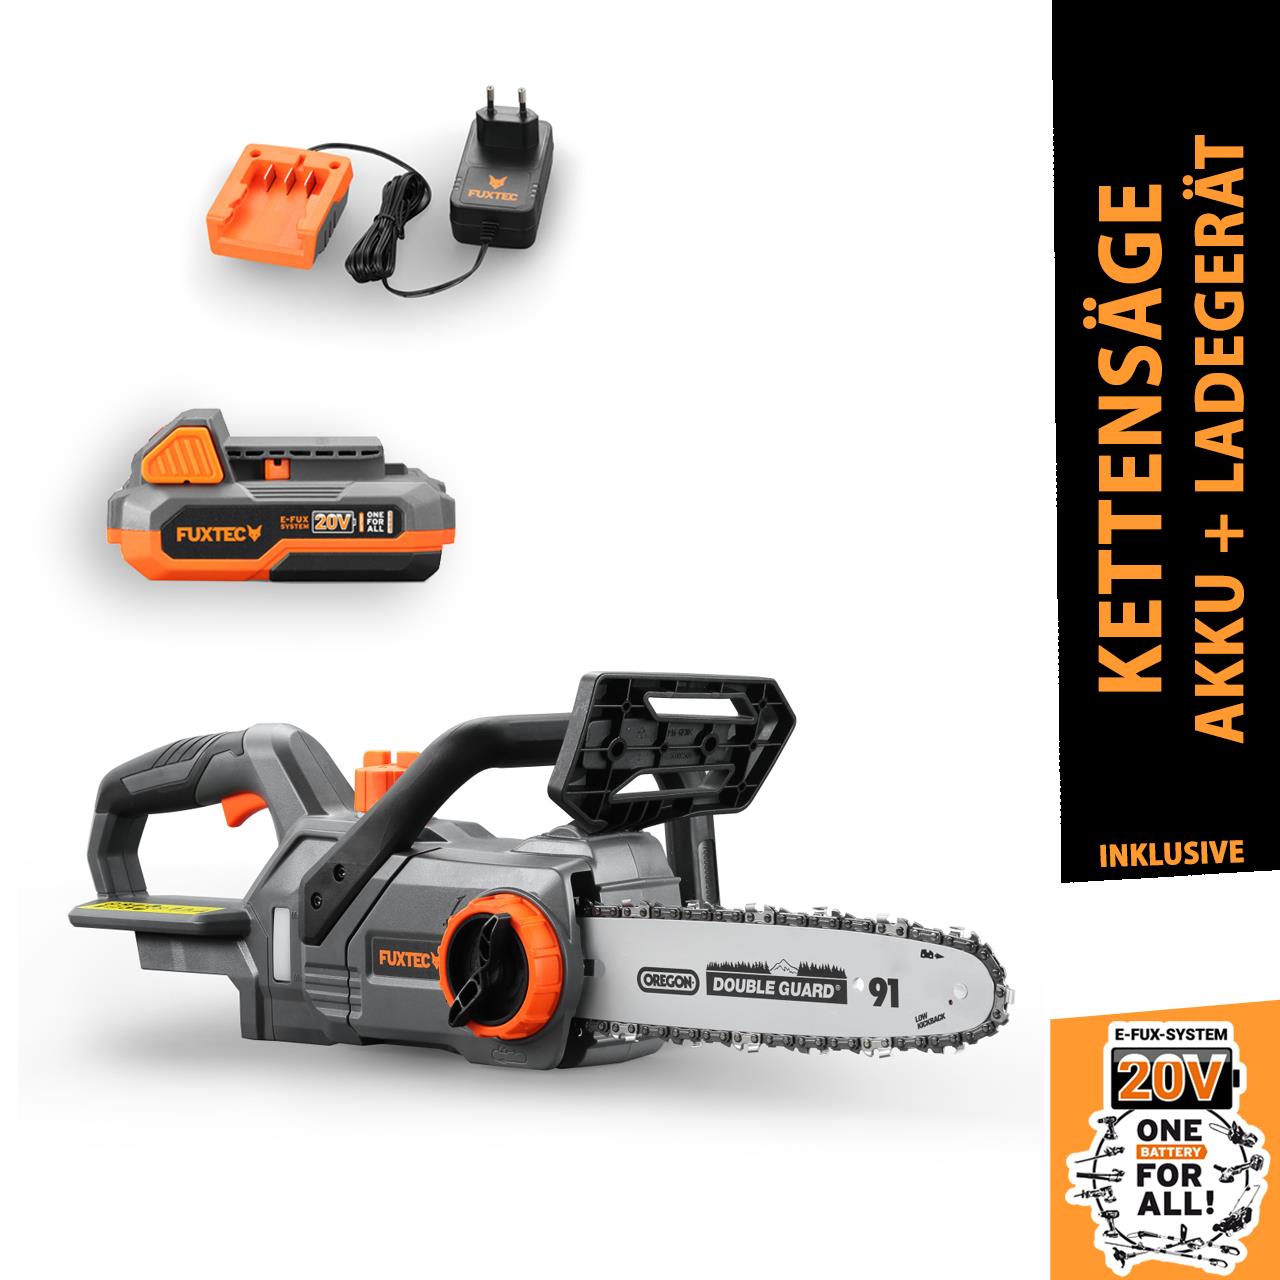 20V cordless chainsaw - Kit FUXTEC FX-E1KS20 incl. battery (2Ah) and charger (1A)